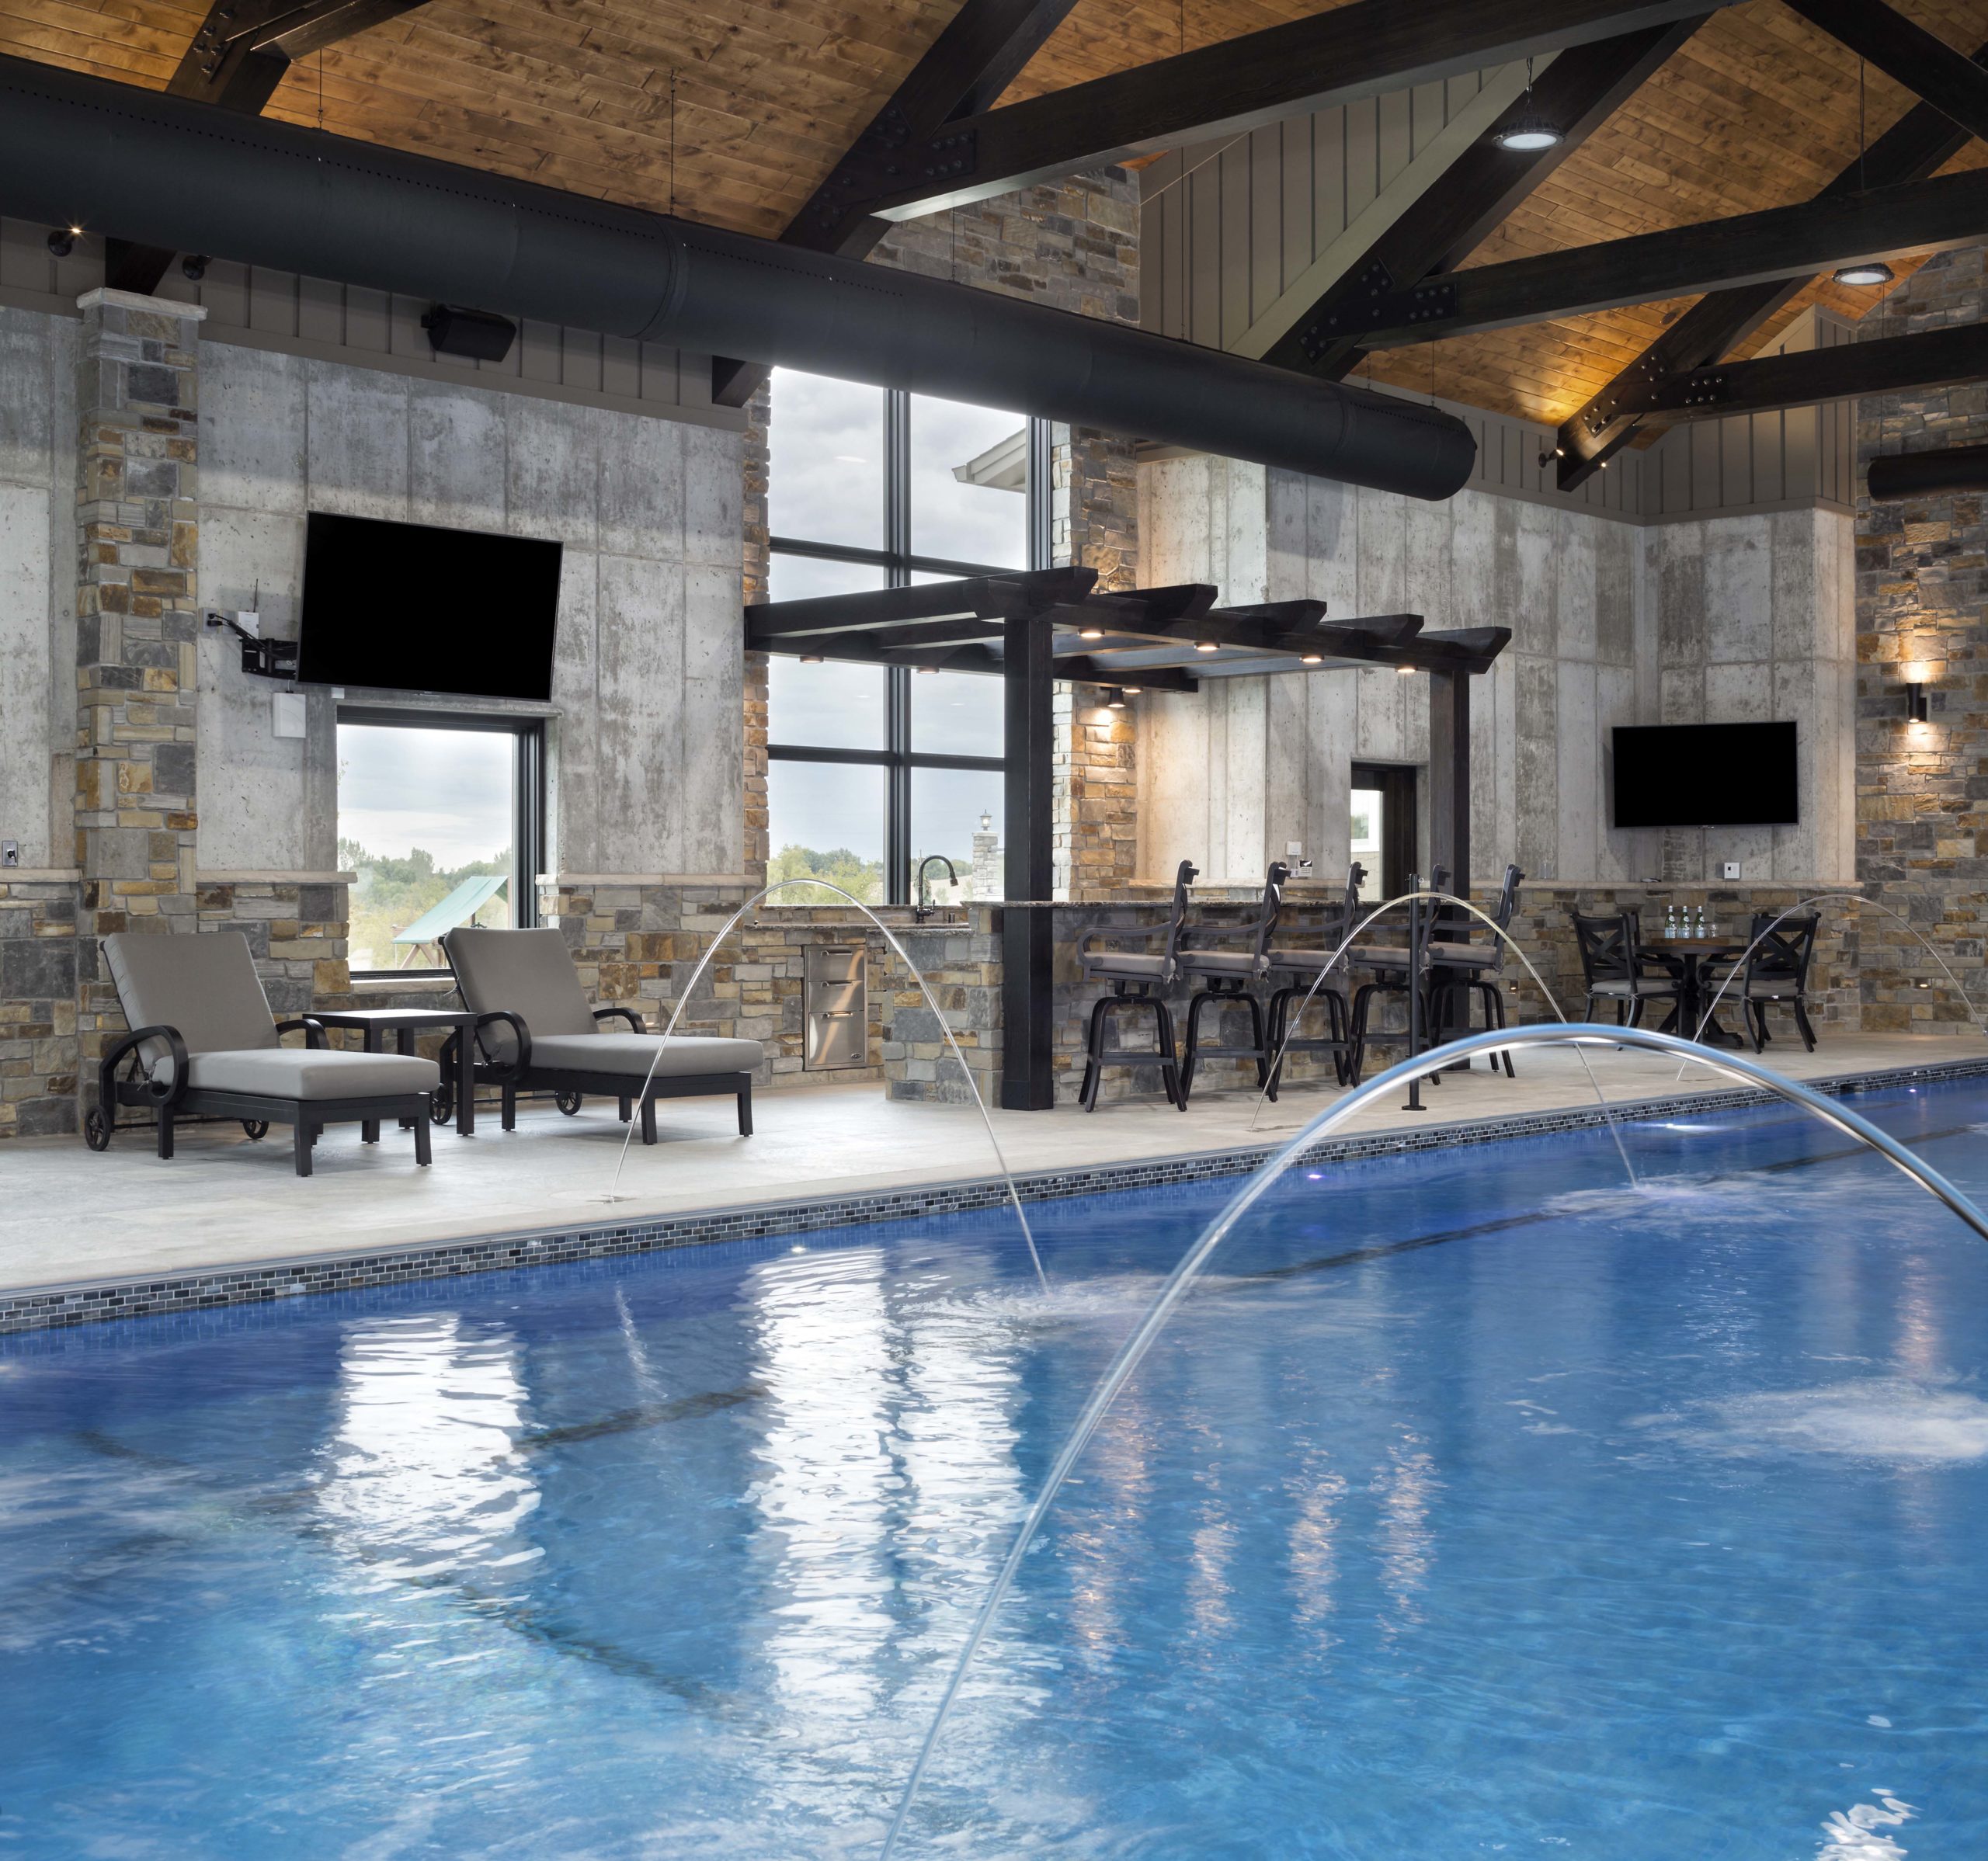 An indoor swimming pool with a waterfall and lounge chairs.